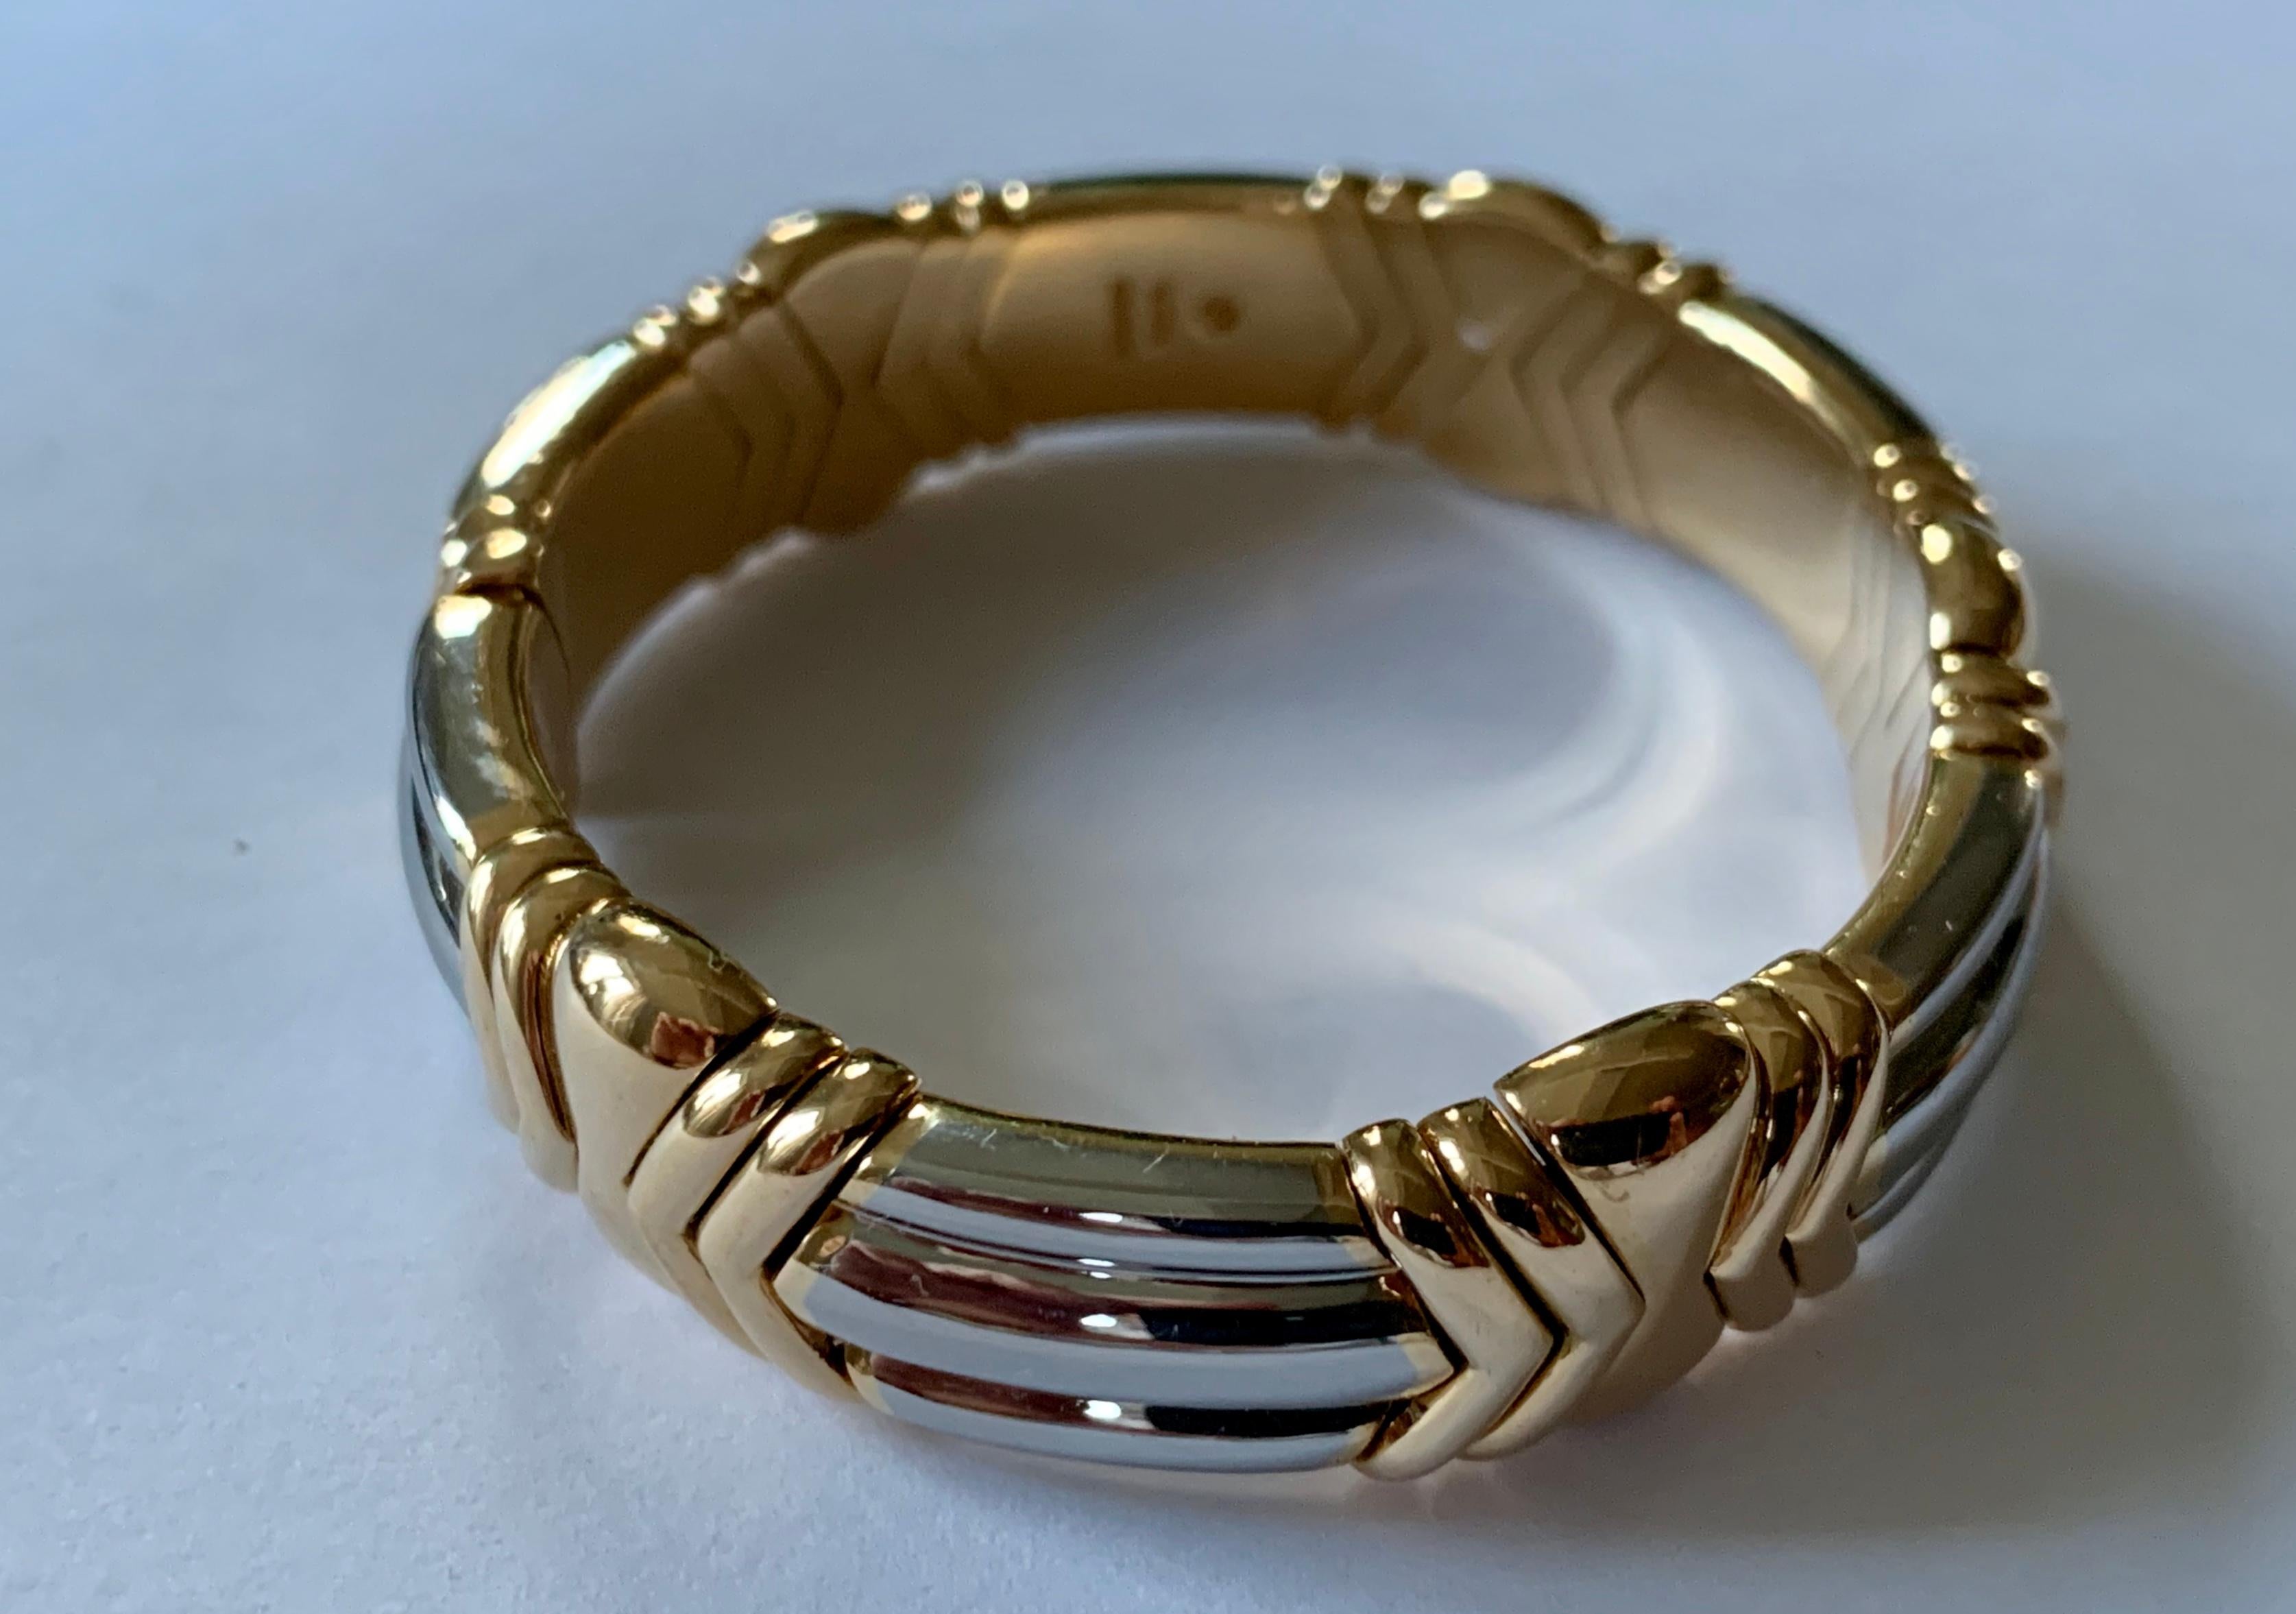 Contemporary Authentic Bulgari 18 Karat Yellow Gold and Stainless Steel Bangle Bracelet